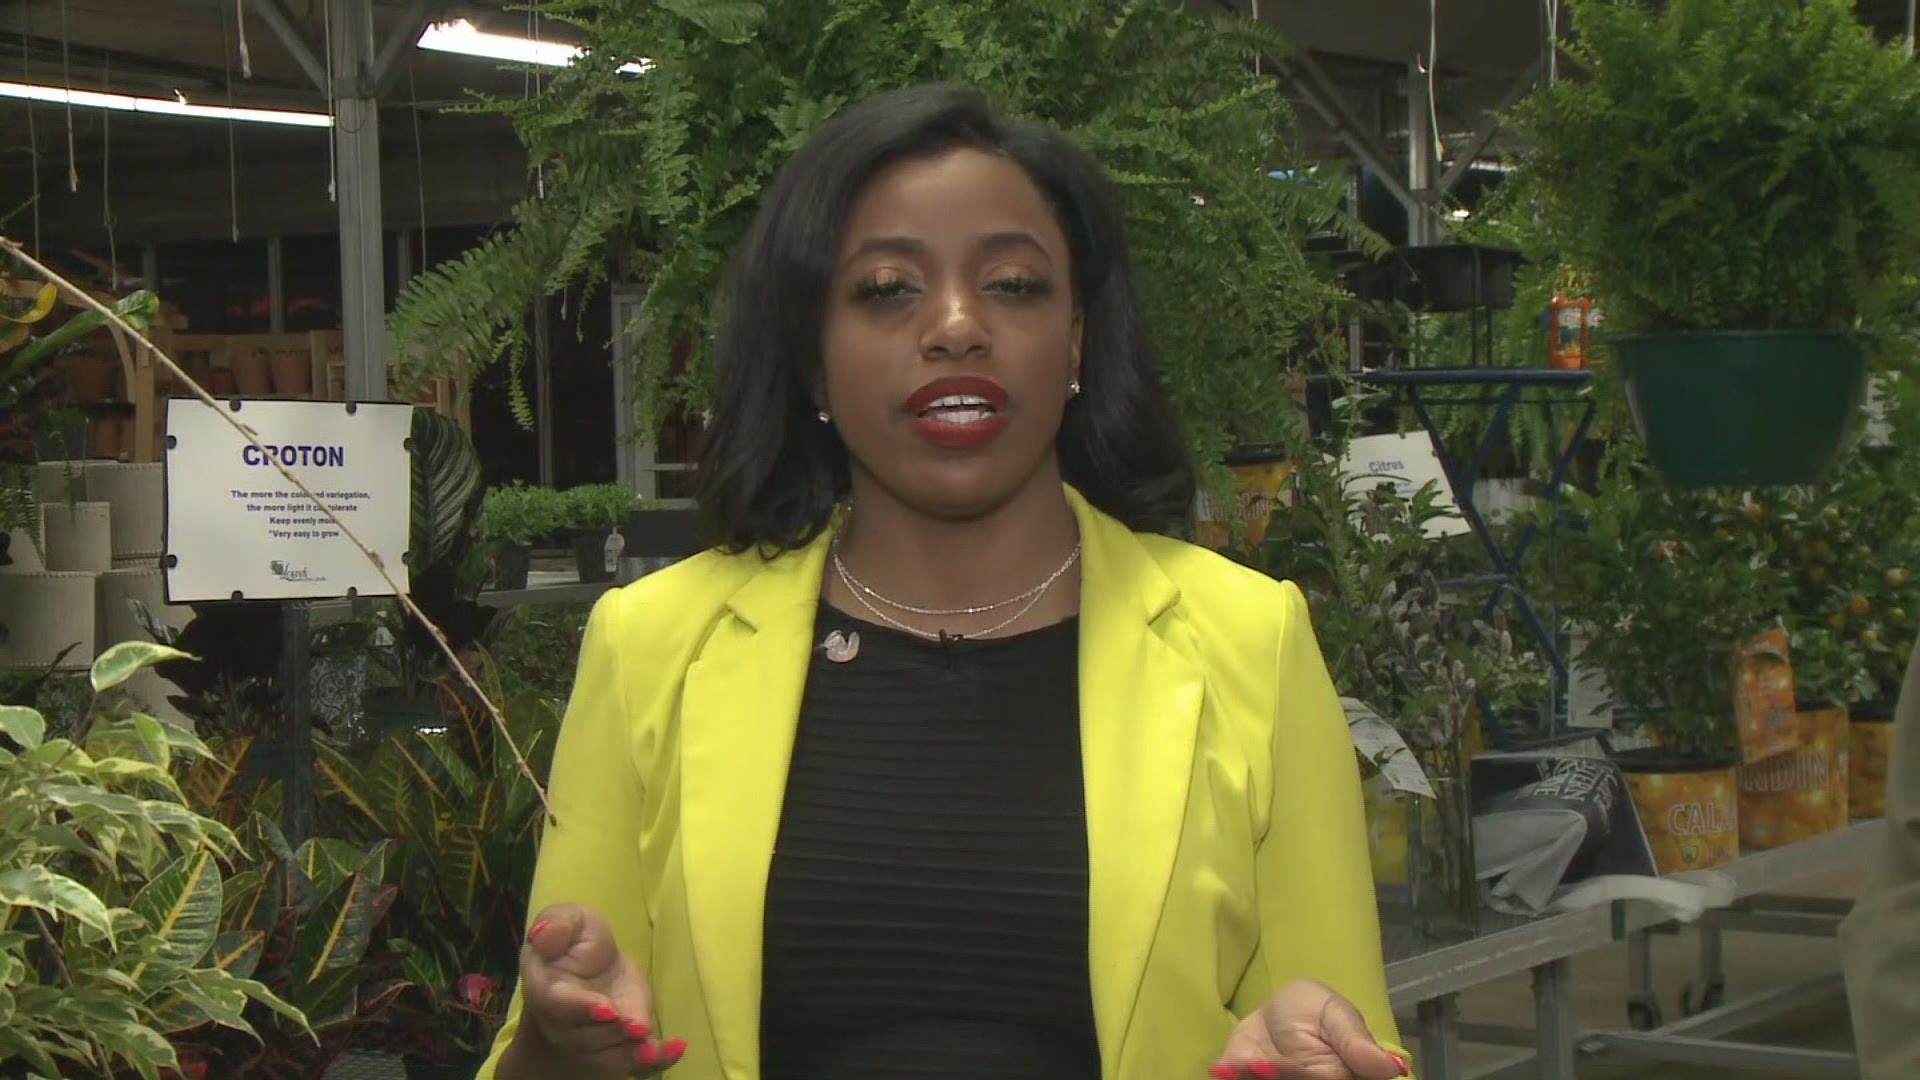 Jasmine talks to Jeff at Lowe's Greenhouse in Chagrin Falls about transferring indoor plants outdoors.